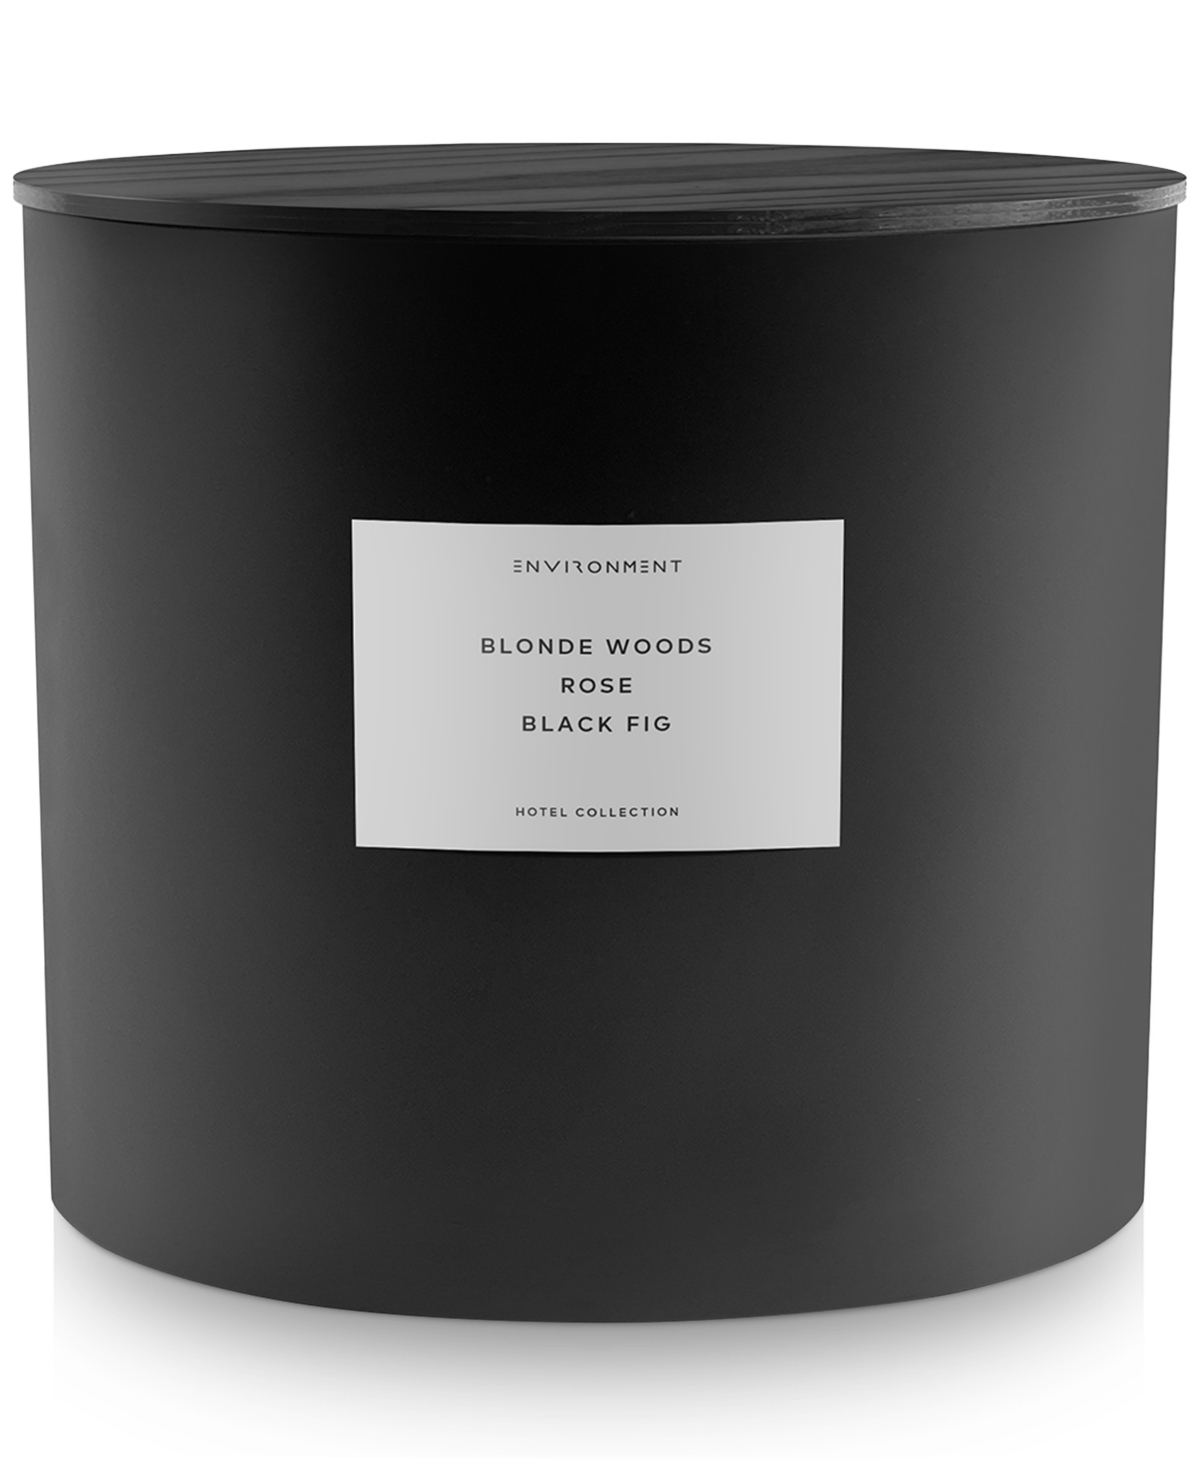 Blonde Woods, Rose & Black Fig Candle (Inspired by 5-Star Hotels), 55 oz.